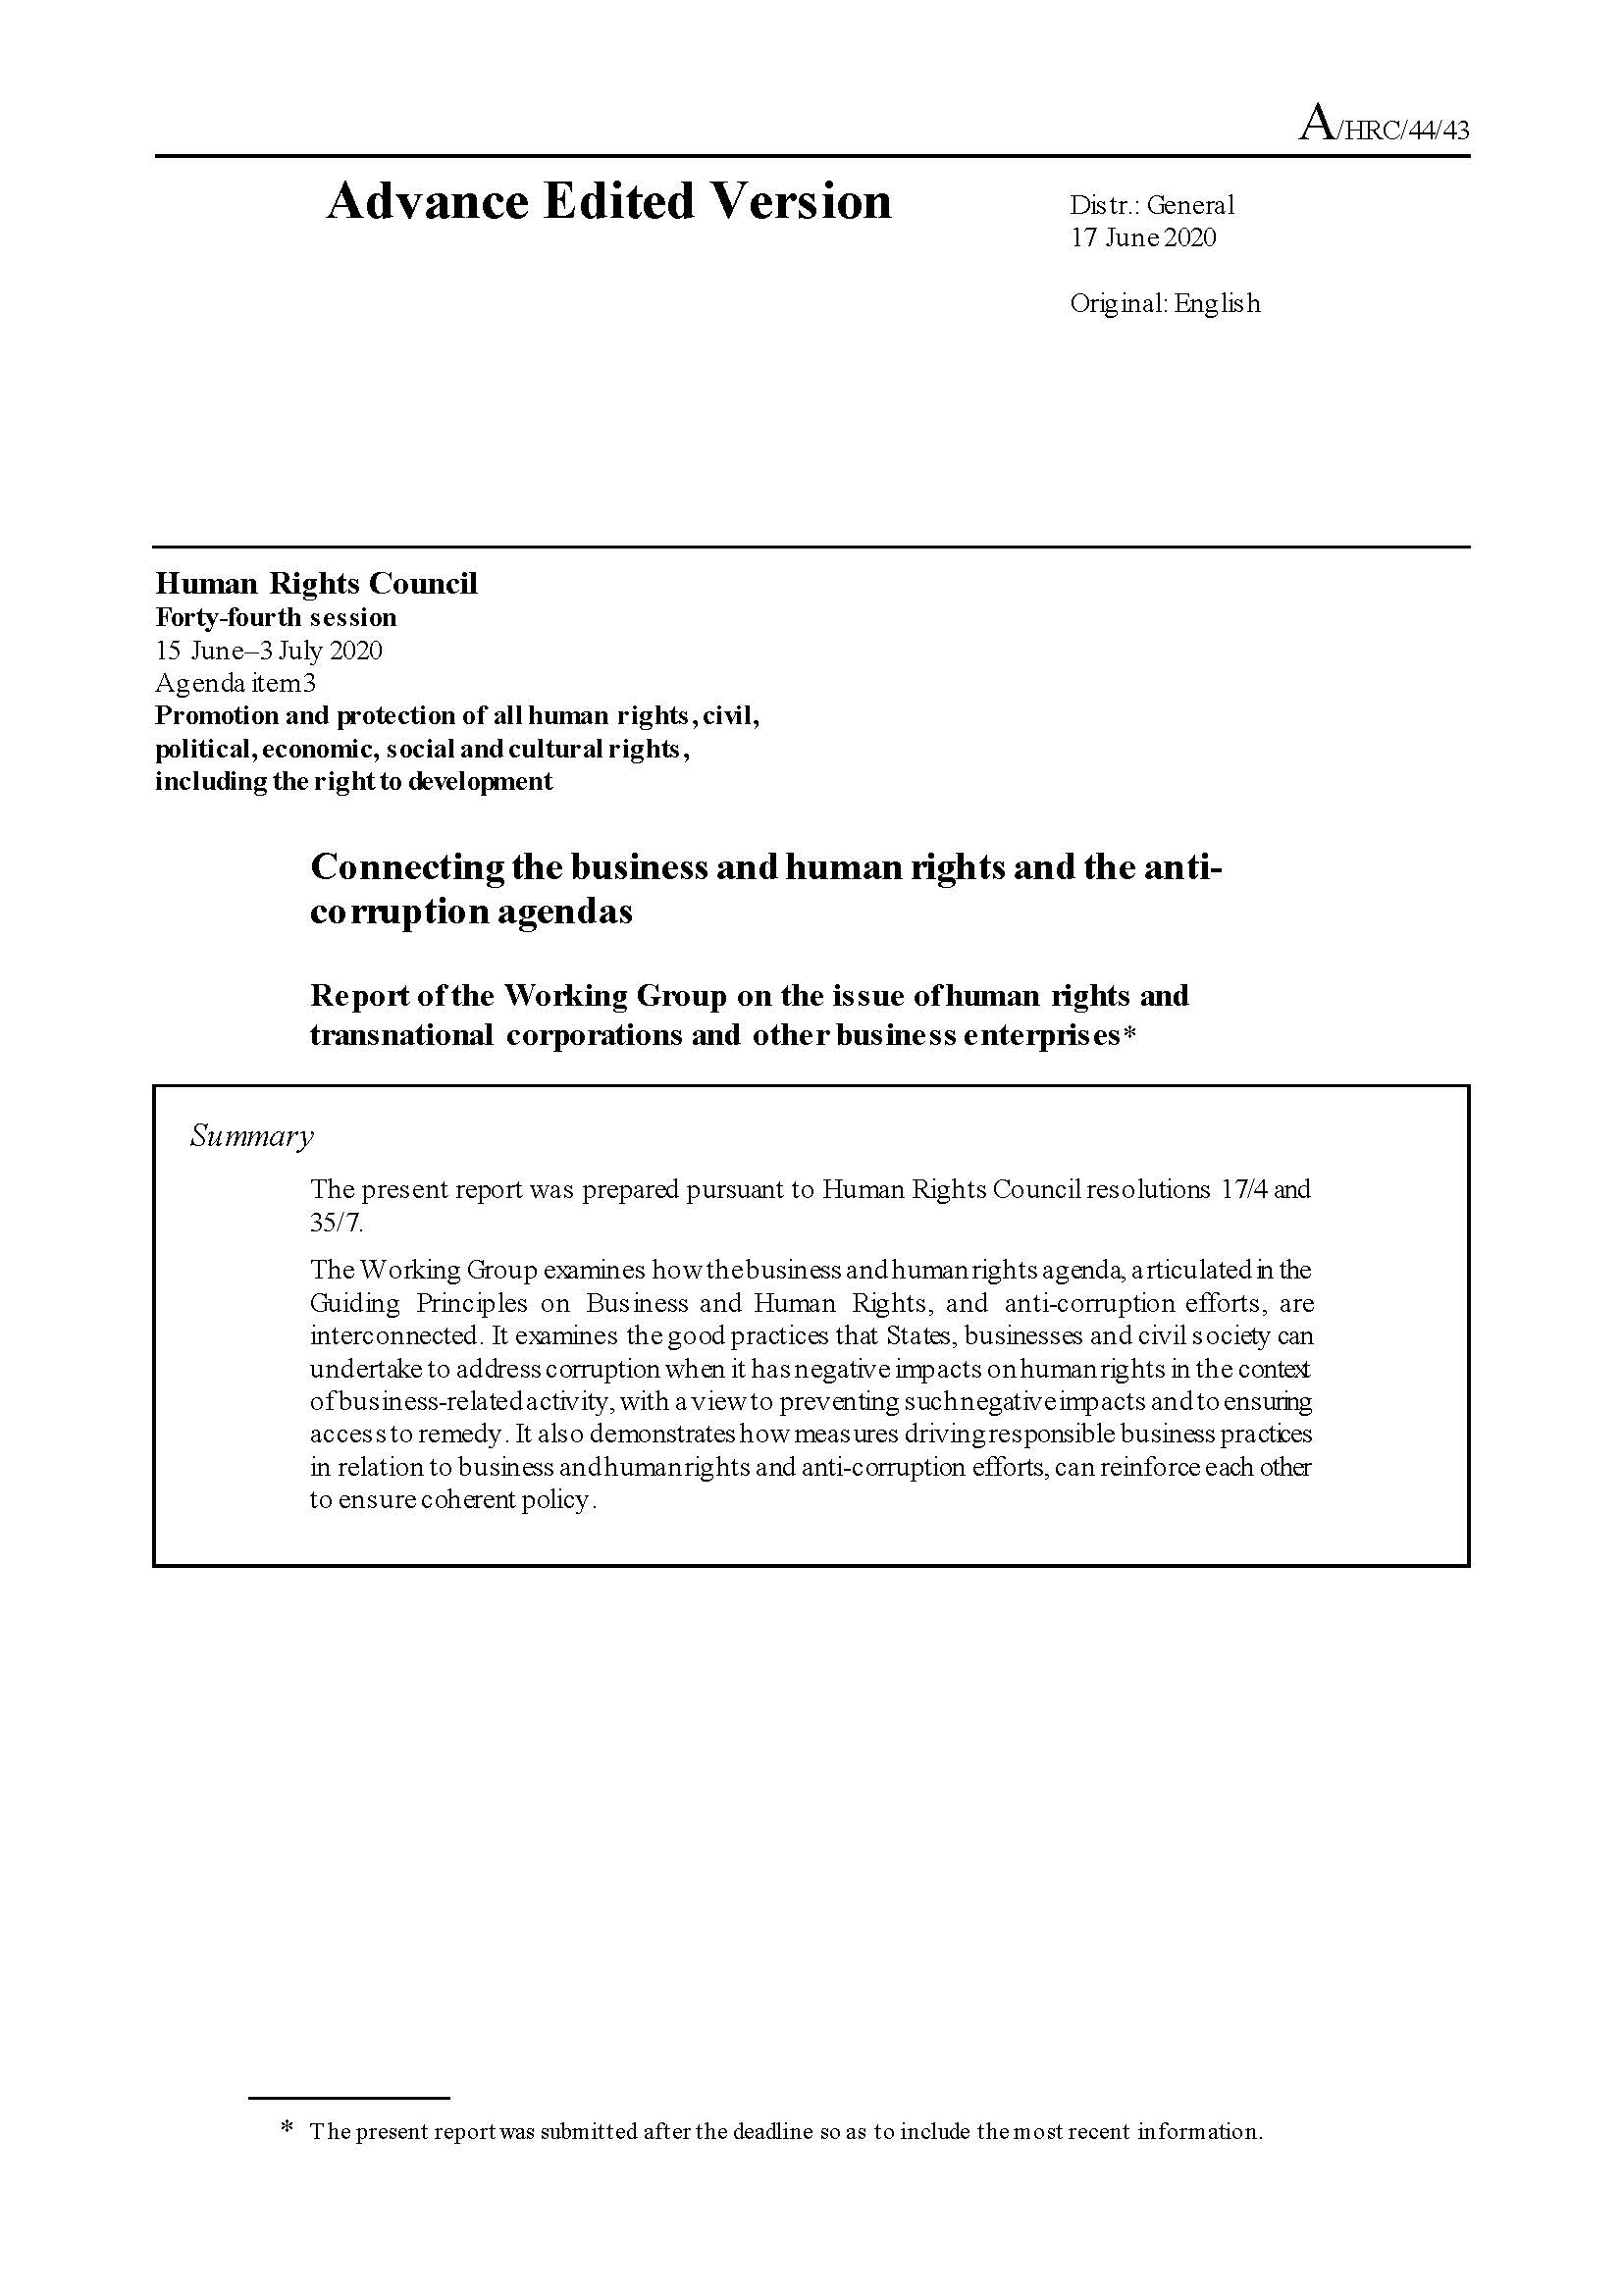 Cover page of HRC report: Connecting the business and human rights and the anti-corruption agendas